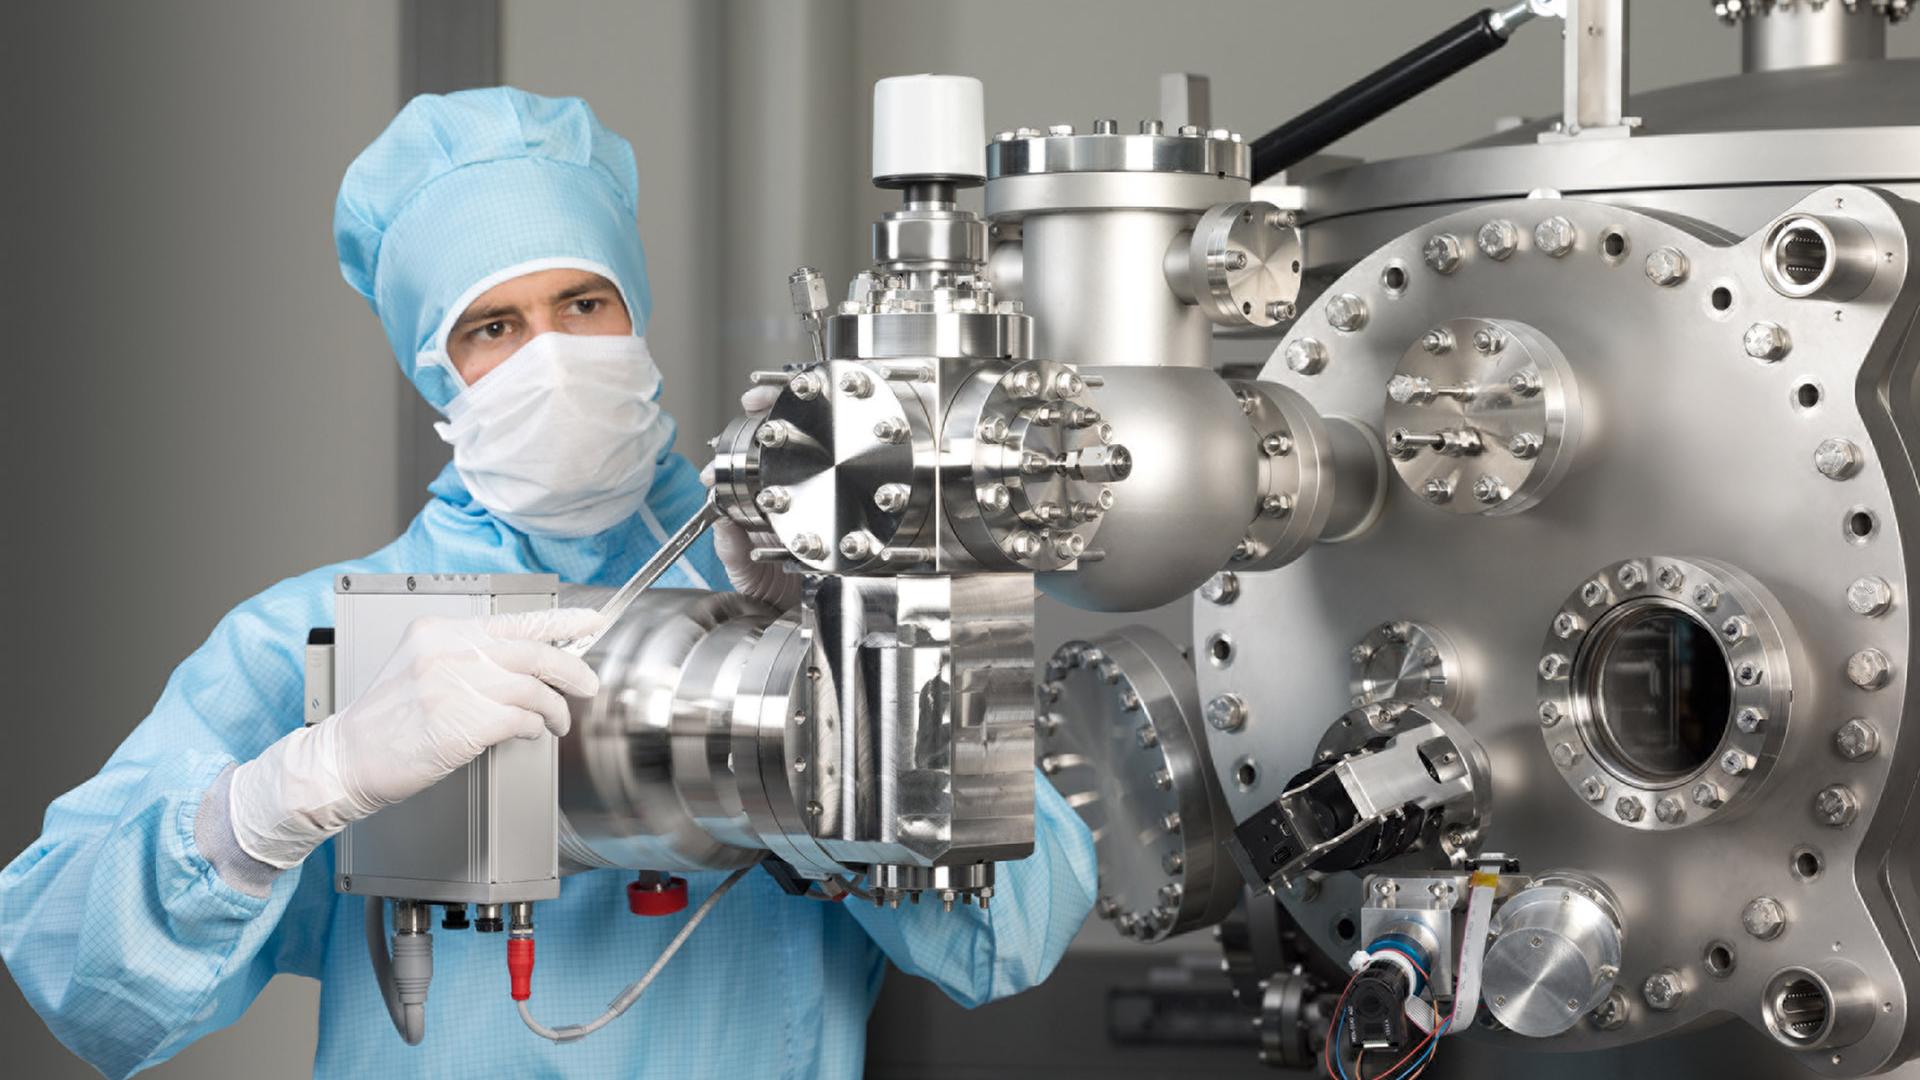 An employee of ZEISS works on the SMT technologies in a cleaning room